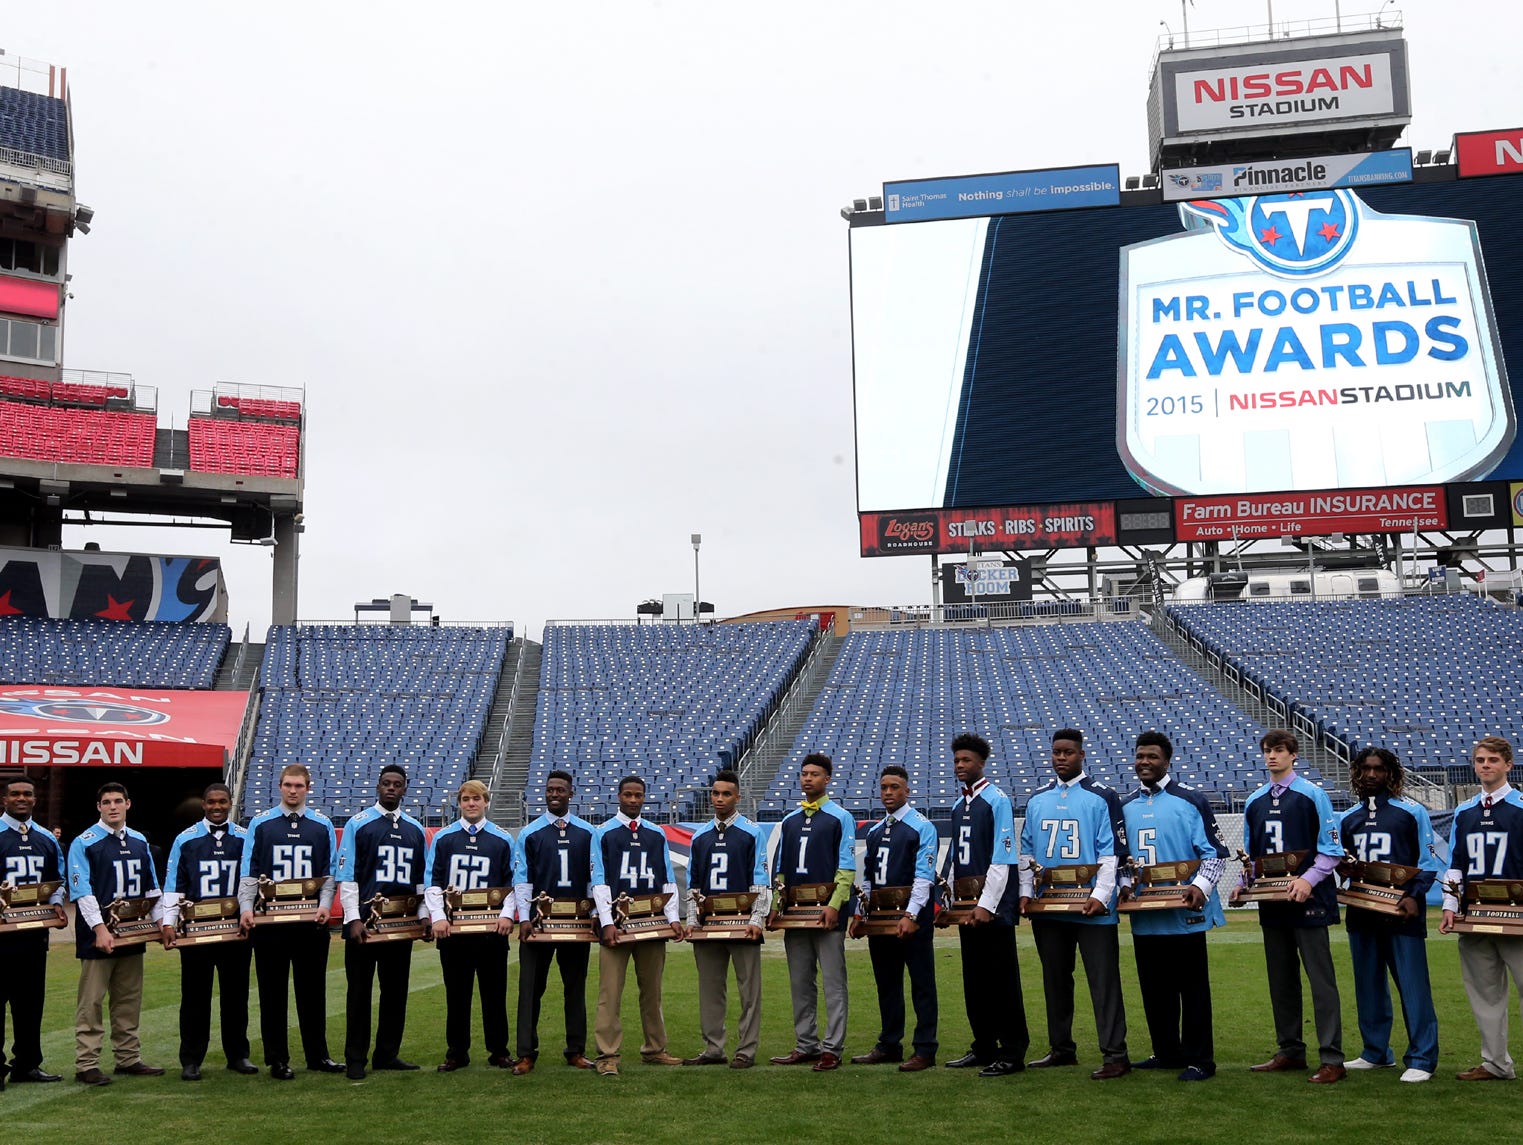 The 2015 Tennesseee Titatns Mr. Football Award winners on the Nissan Stadium Titans football field gather for a photograph in their own personalized Titans jerseys.